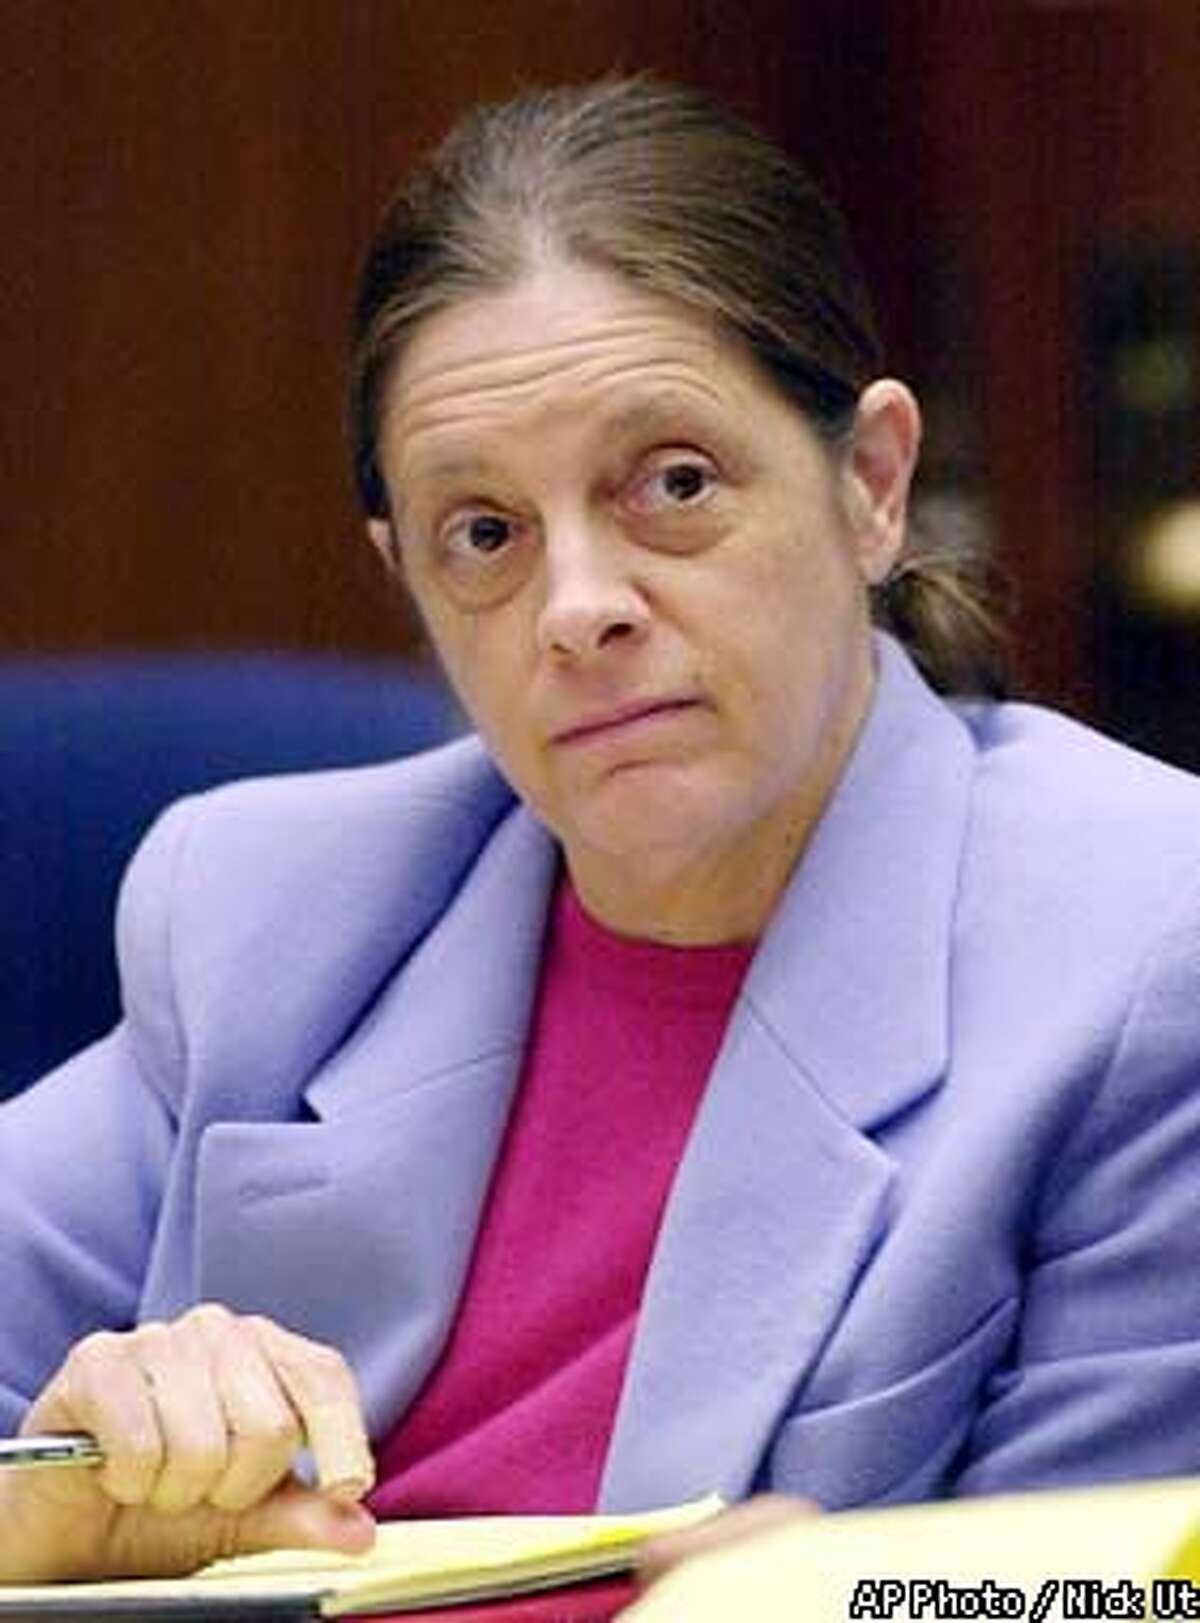 Chief defendant Marjorie Knoller listens to closing arguments in the San Francisco dog mauling trial Monday, March 18, 2002, at the Los Angeles County Courthouse in Los Angeles. Knoller, who was present when two dogs she and her husband kept attacked neighbor Diane Whipple in a hallway of their San Francisco apartment building on Jan. 26, 2001, is charged with second-degree murder. Knoller, 46, and her husband Robert Noel, 60, are both charged with involuntary manslaughter and keeping a mischievous dogthat killed a person. (AP Photo/Nick Ut, Pool)